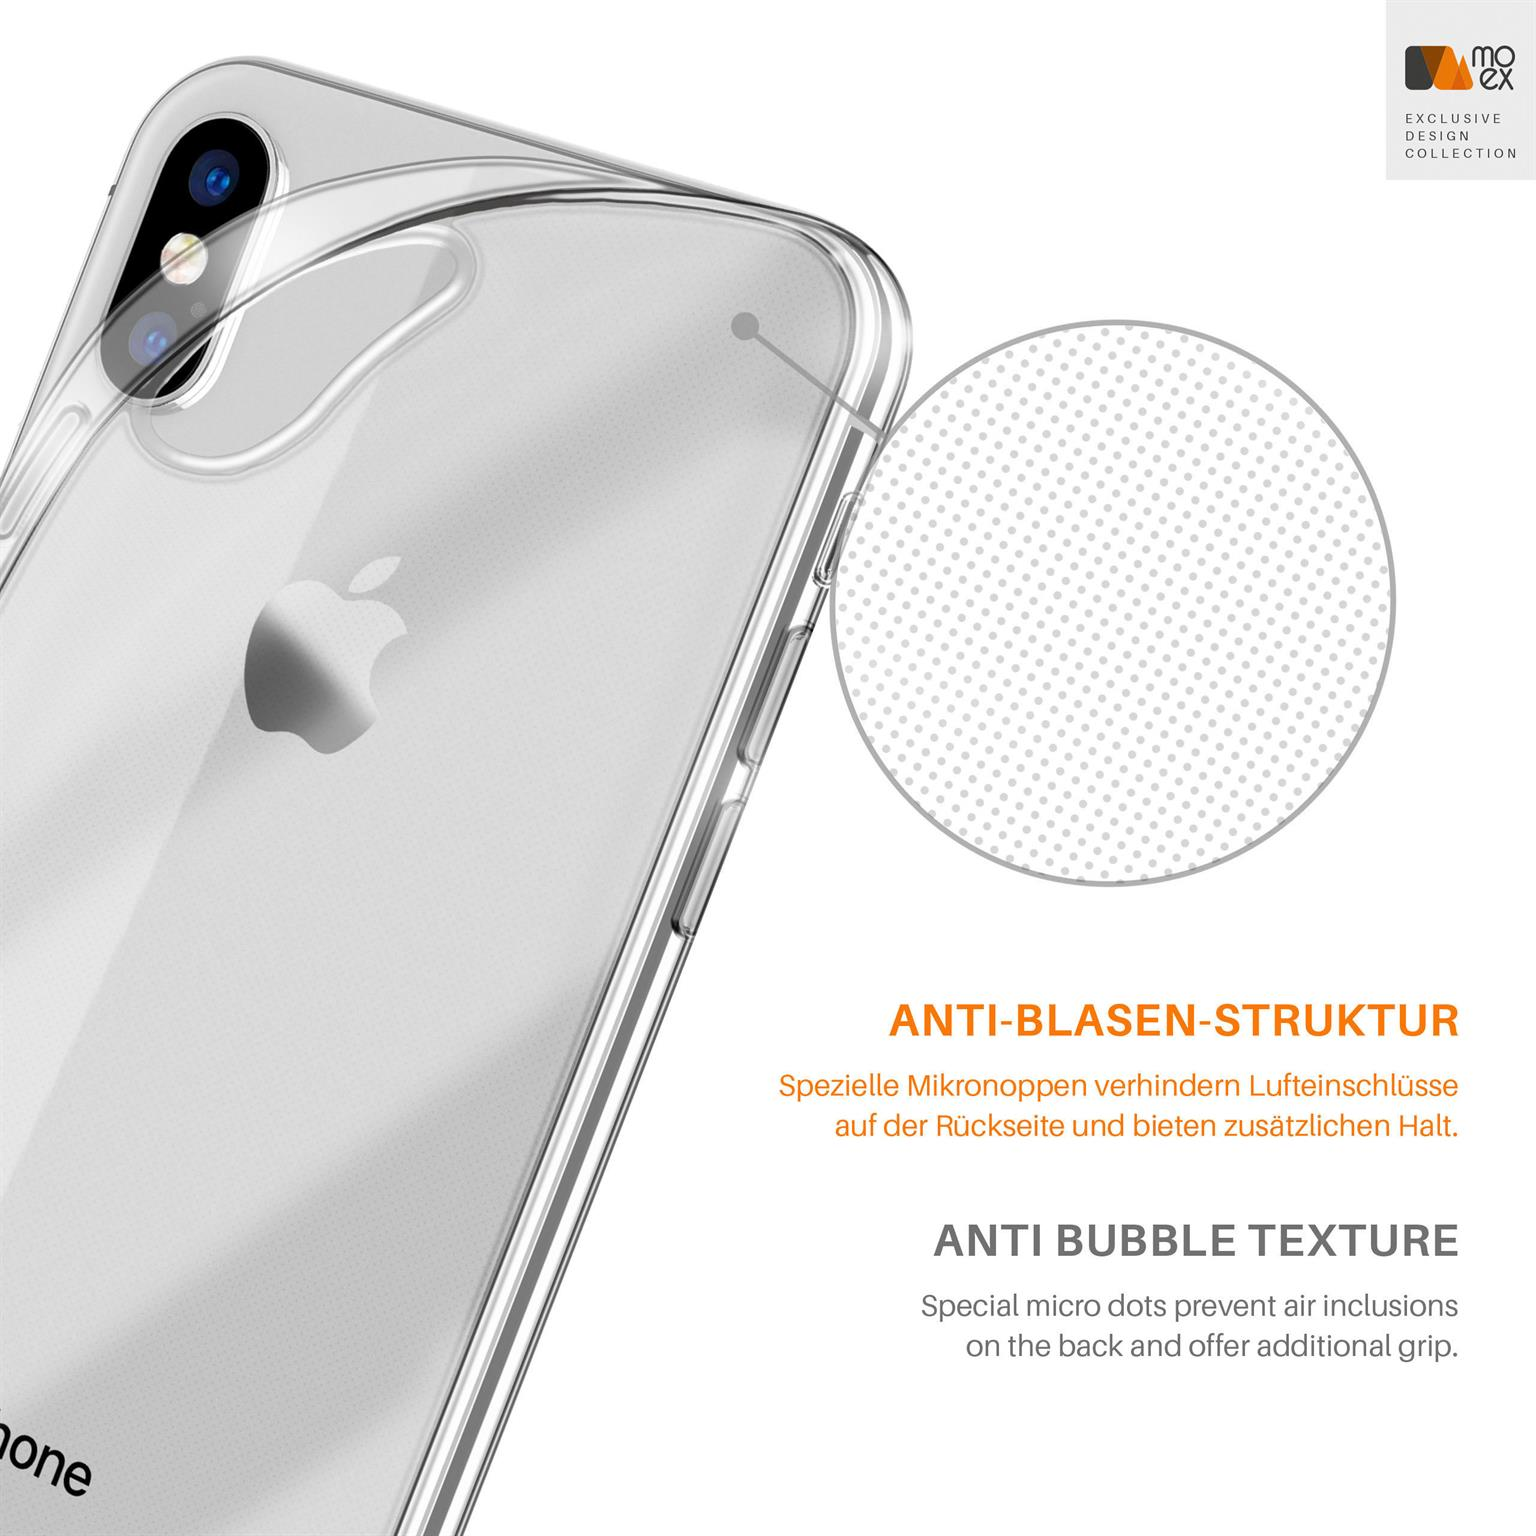 Crystal-Clear Aero MOEX iPhone Backcover, XS Max, Case, Apple,